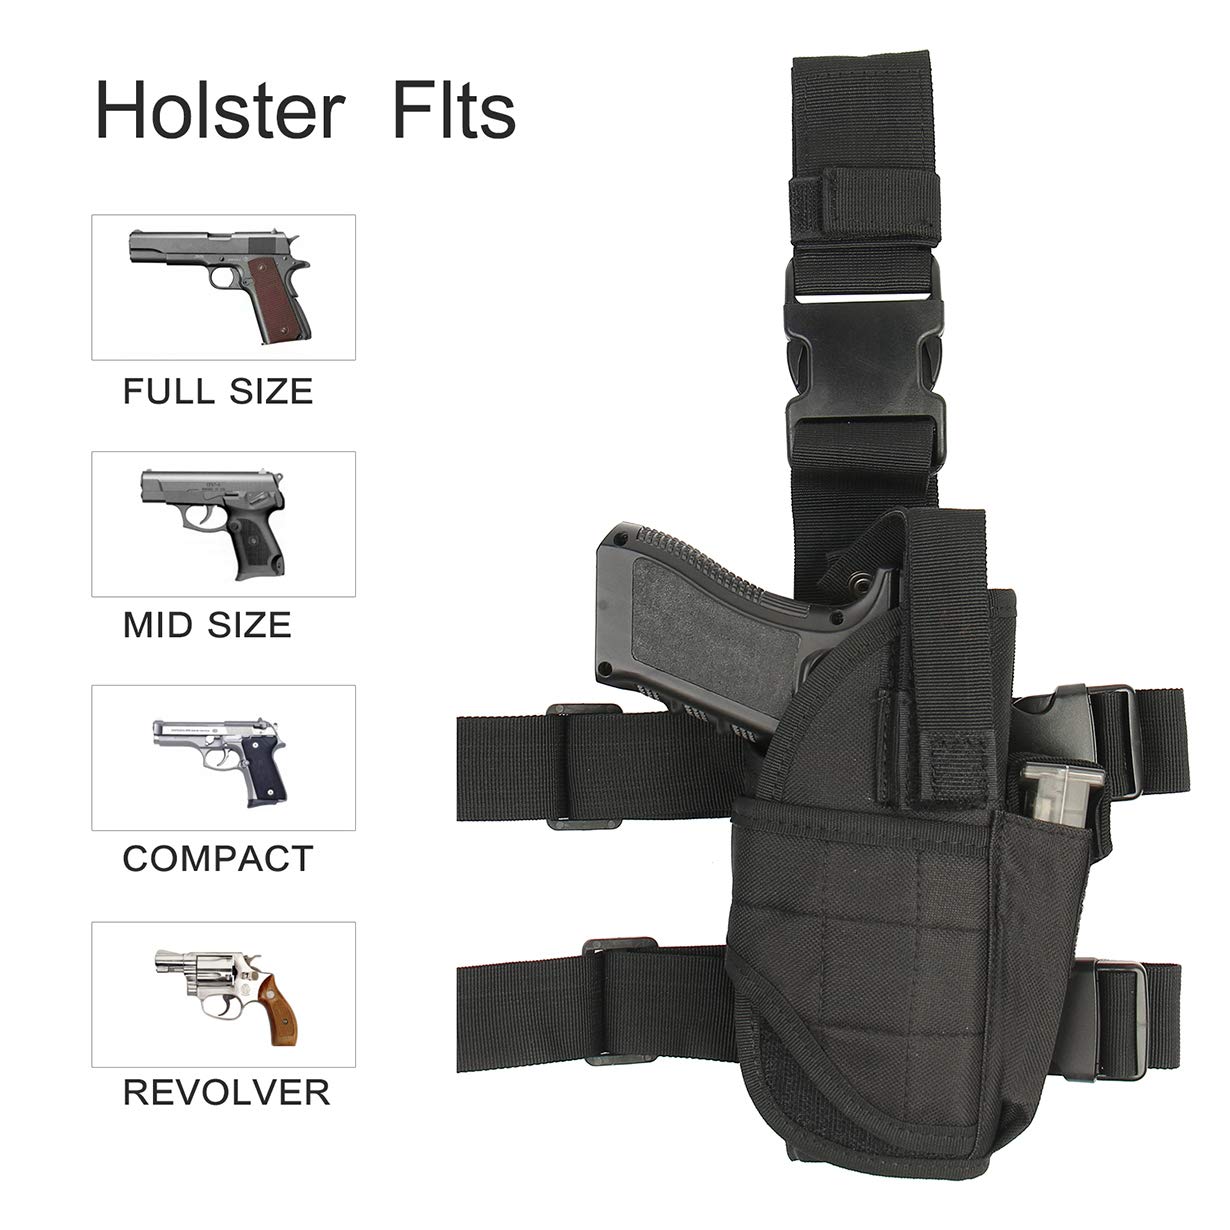 ASETIC Drop Leg Holster for Pistol- Right Handed Tactical Thigh Airsoft Pistol Holster with Magazine Pouch Adjustable Gun Holster